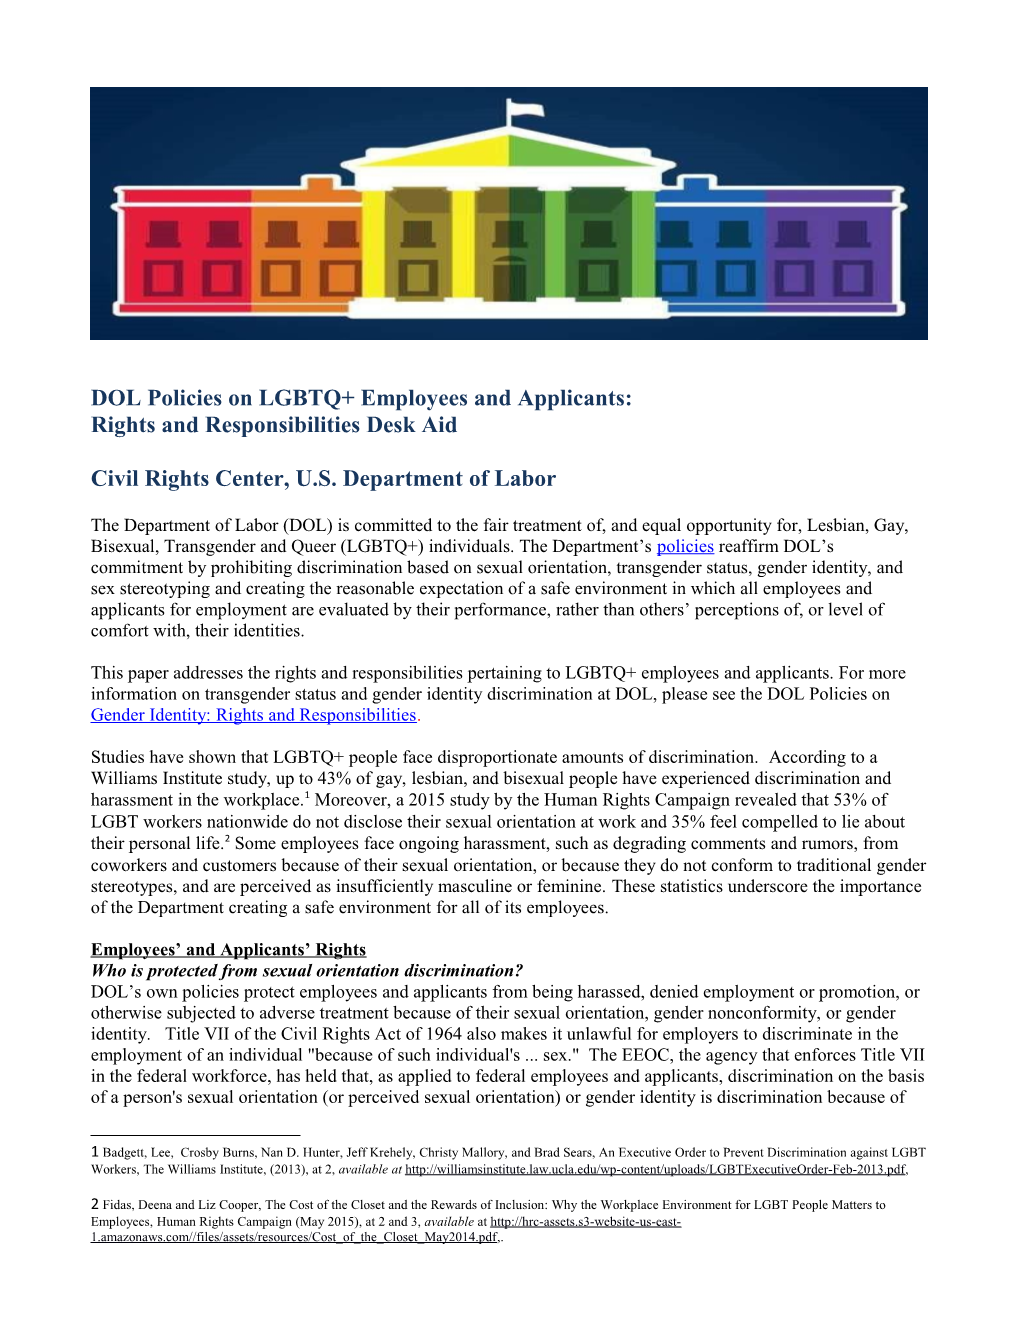 DOL Policies on LGBTQ+ Employees and Applicants